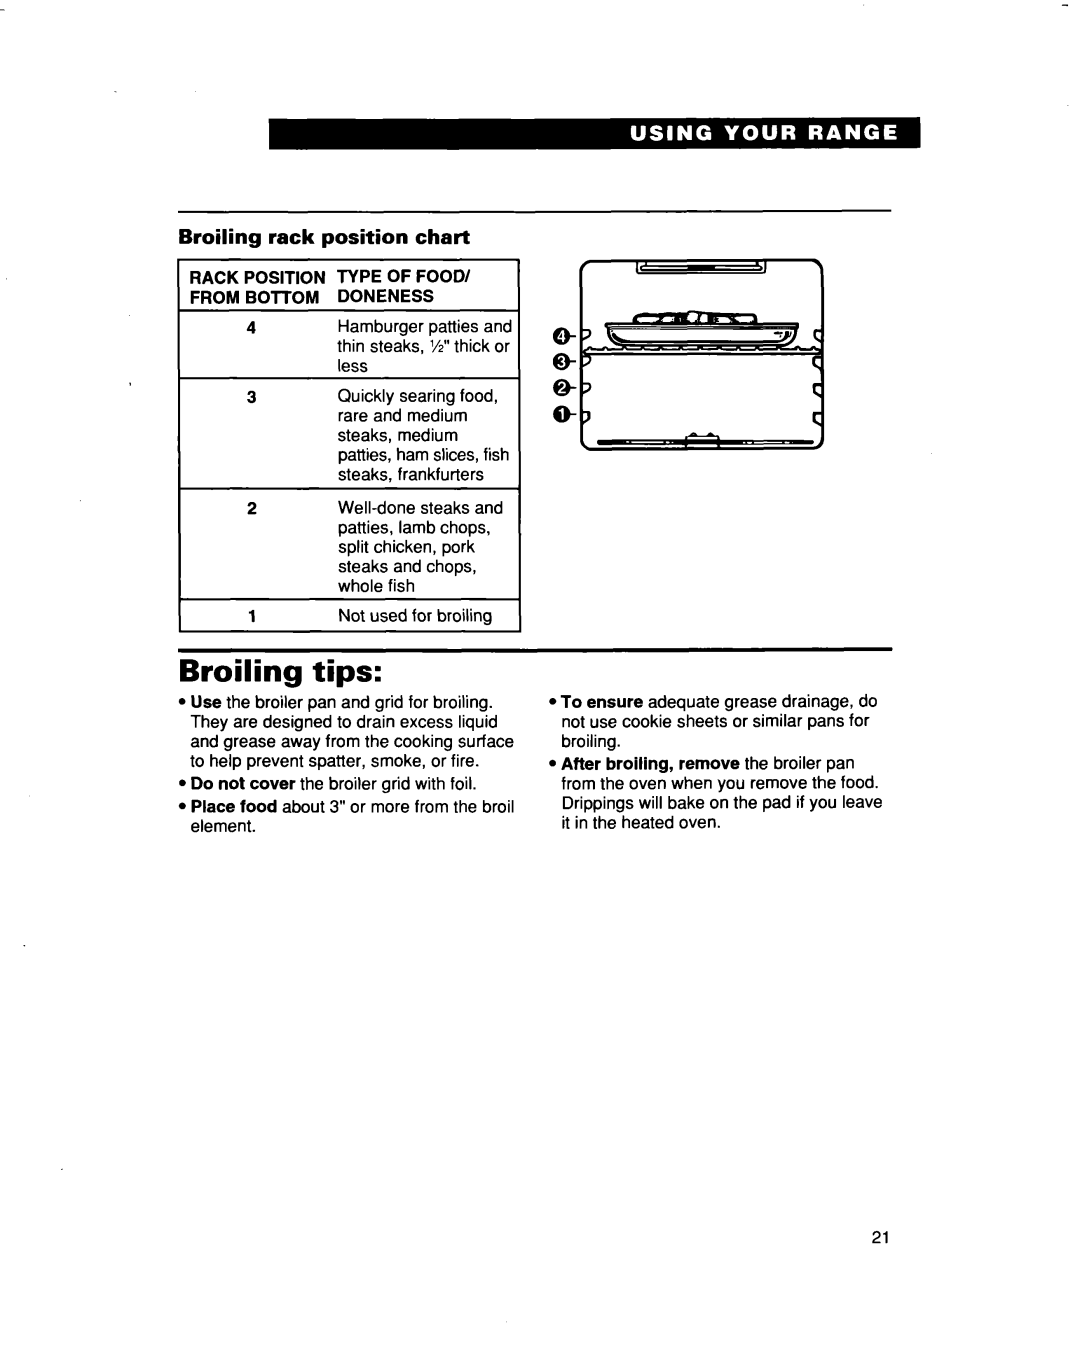 Whirlpool RF386PXD warranty Broiling tips, Broiling rack position chart 